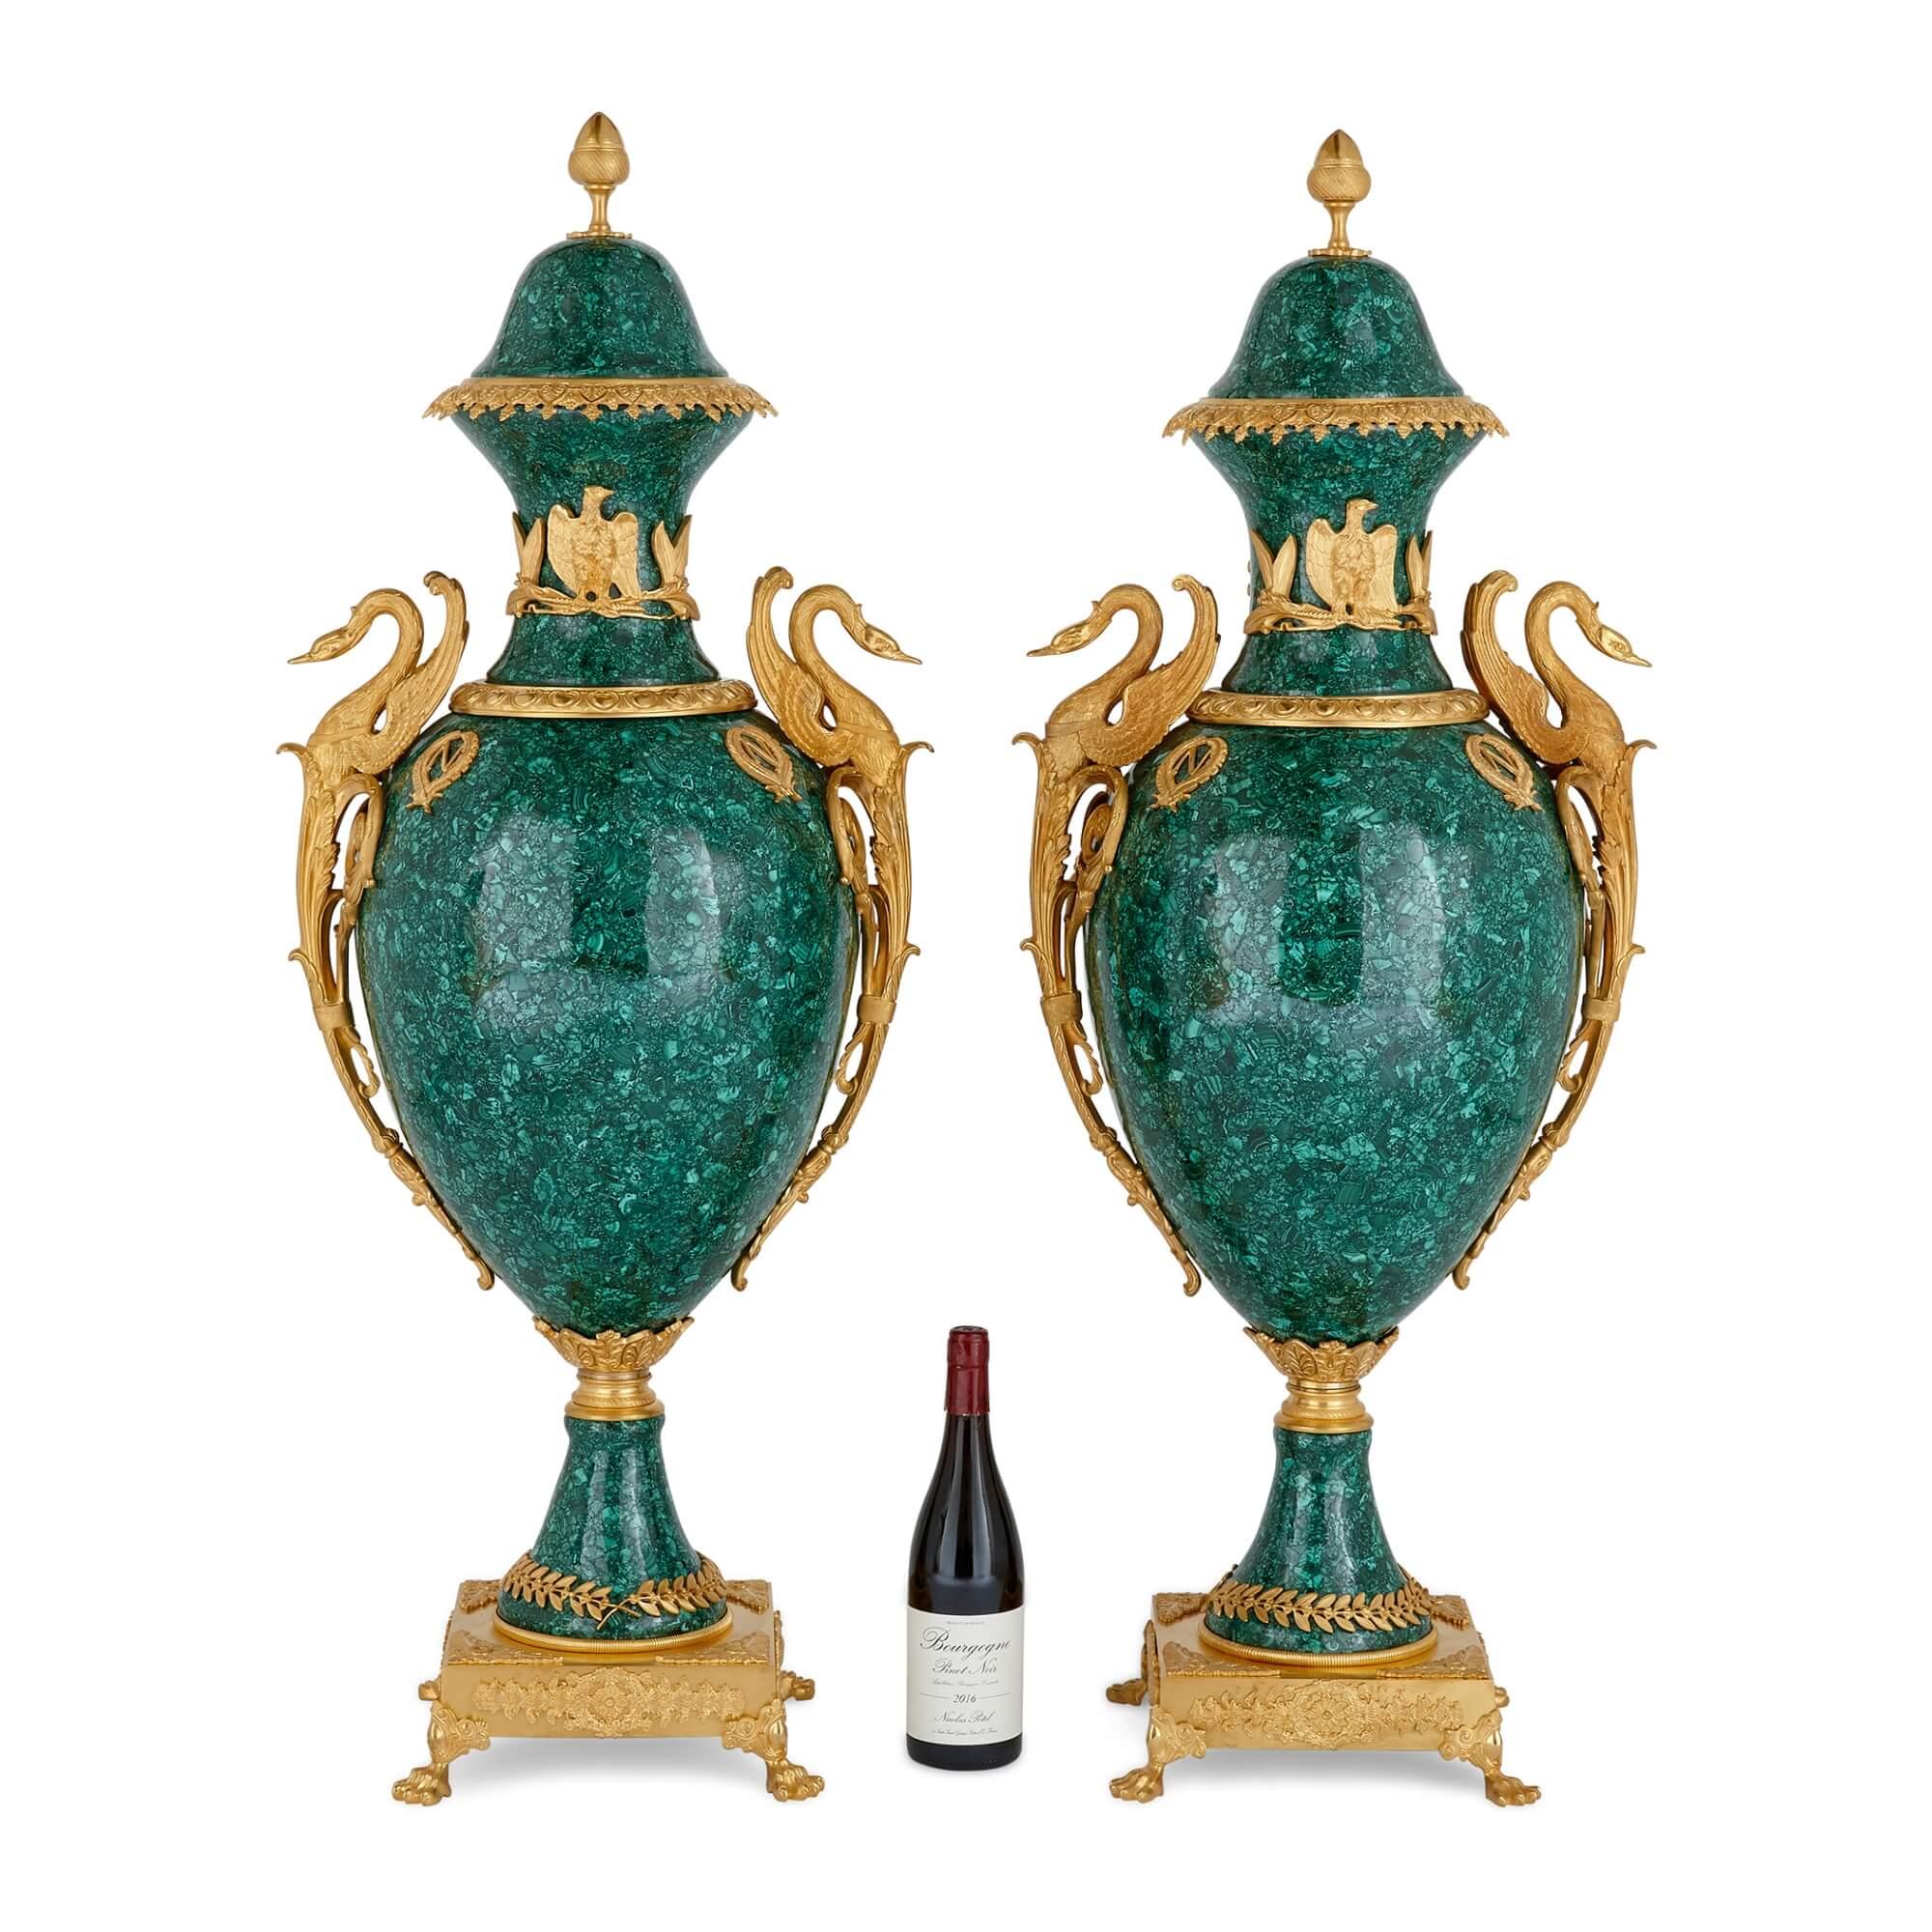 These splendid malachite and ormolu mounted vases are executed in the French Empire style, and are emblazoned with gilt decoration that has an unmistakable air of confidence, pride, and victory. On either side they feature beautifully crafted swans